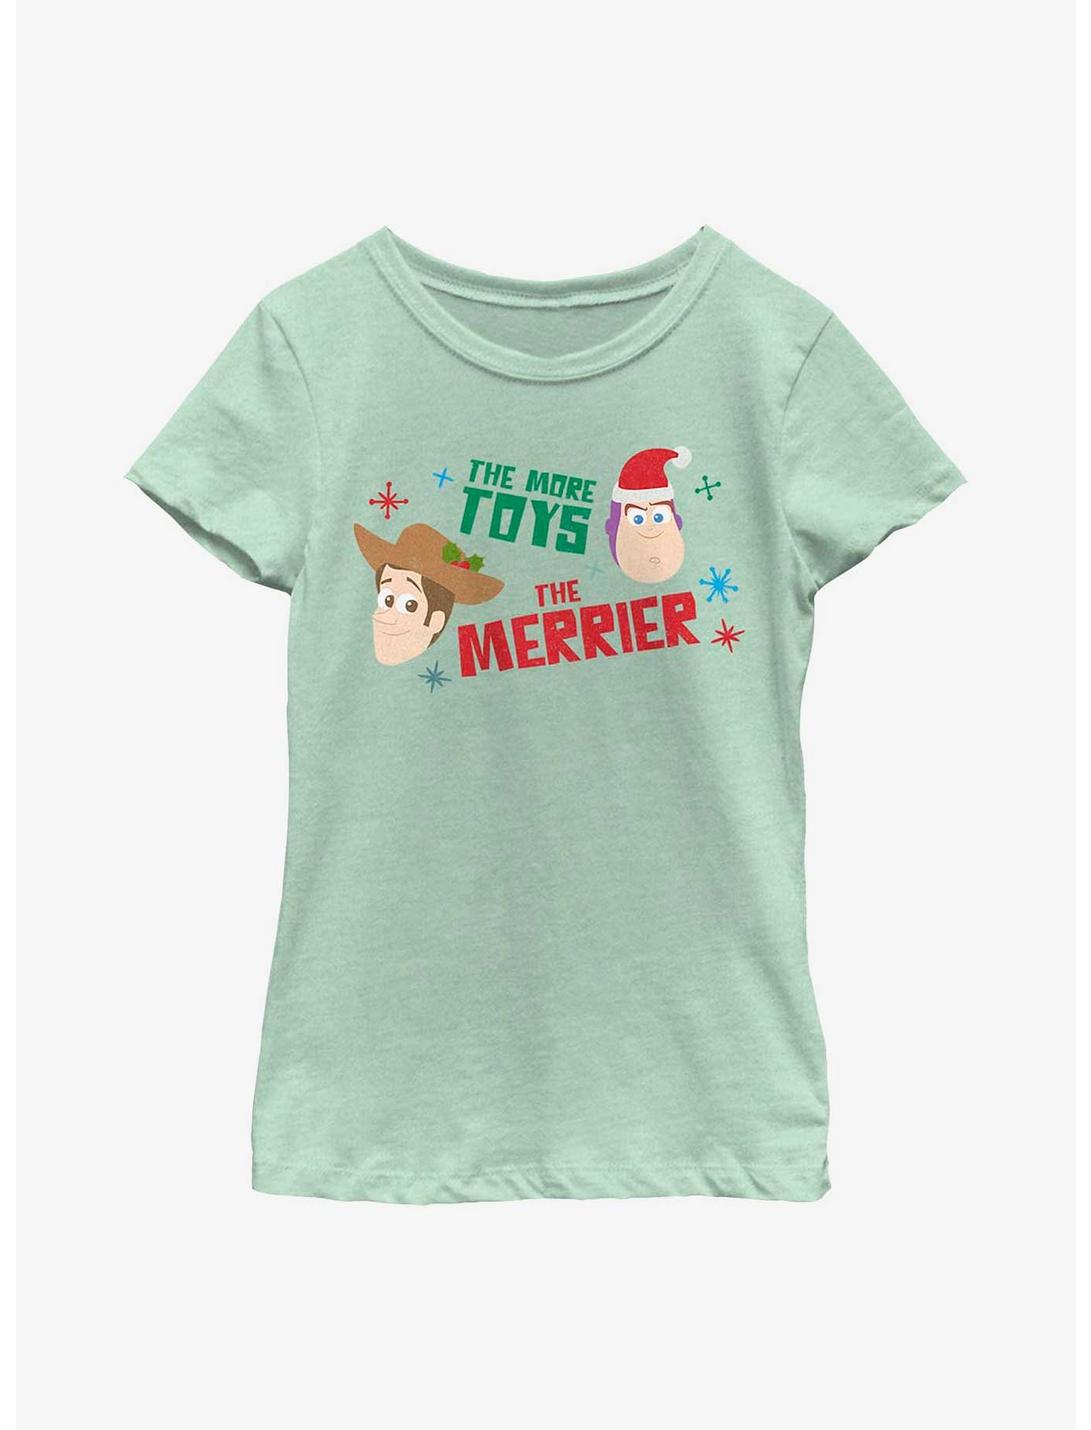 Disney Pixar Toy Story More Toys The Merrier Youth Girls T-Shirt, MINT, hi-res